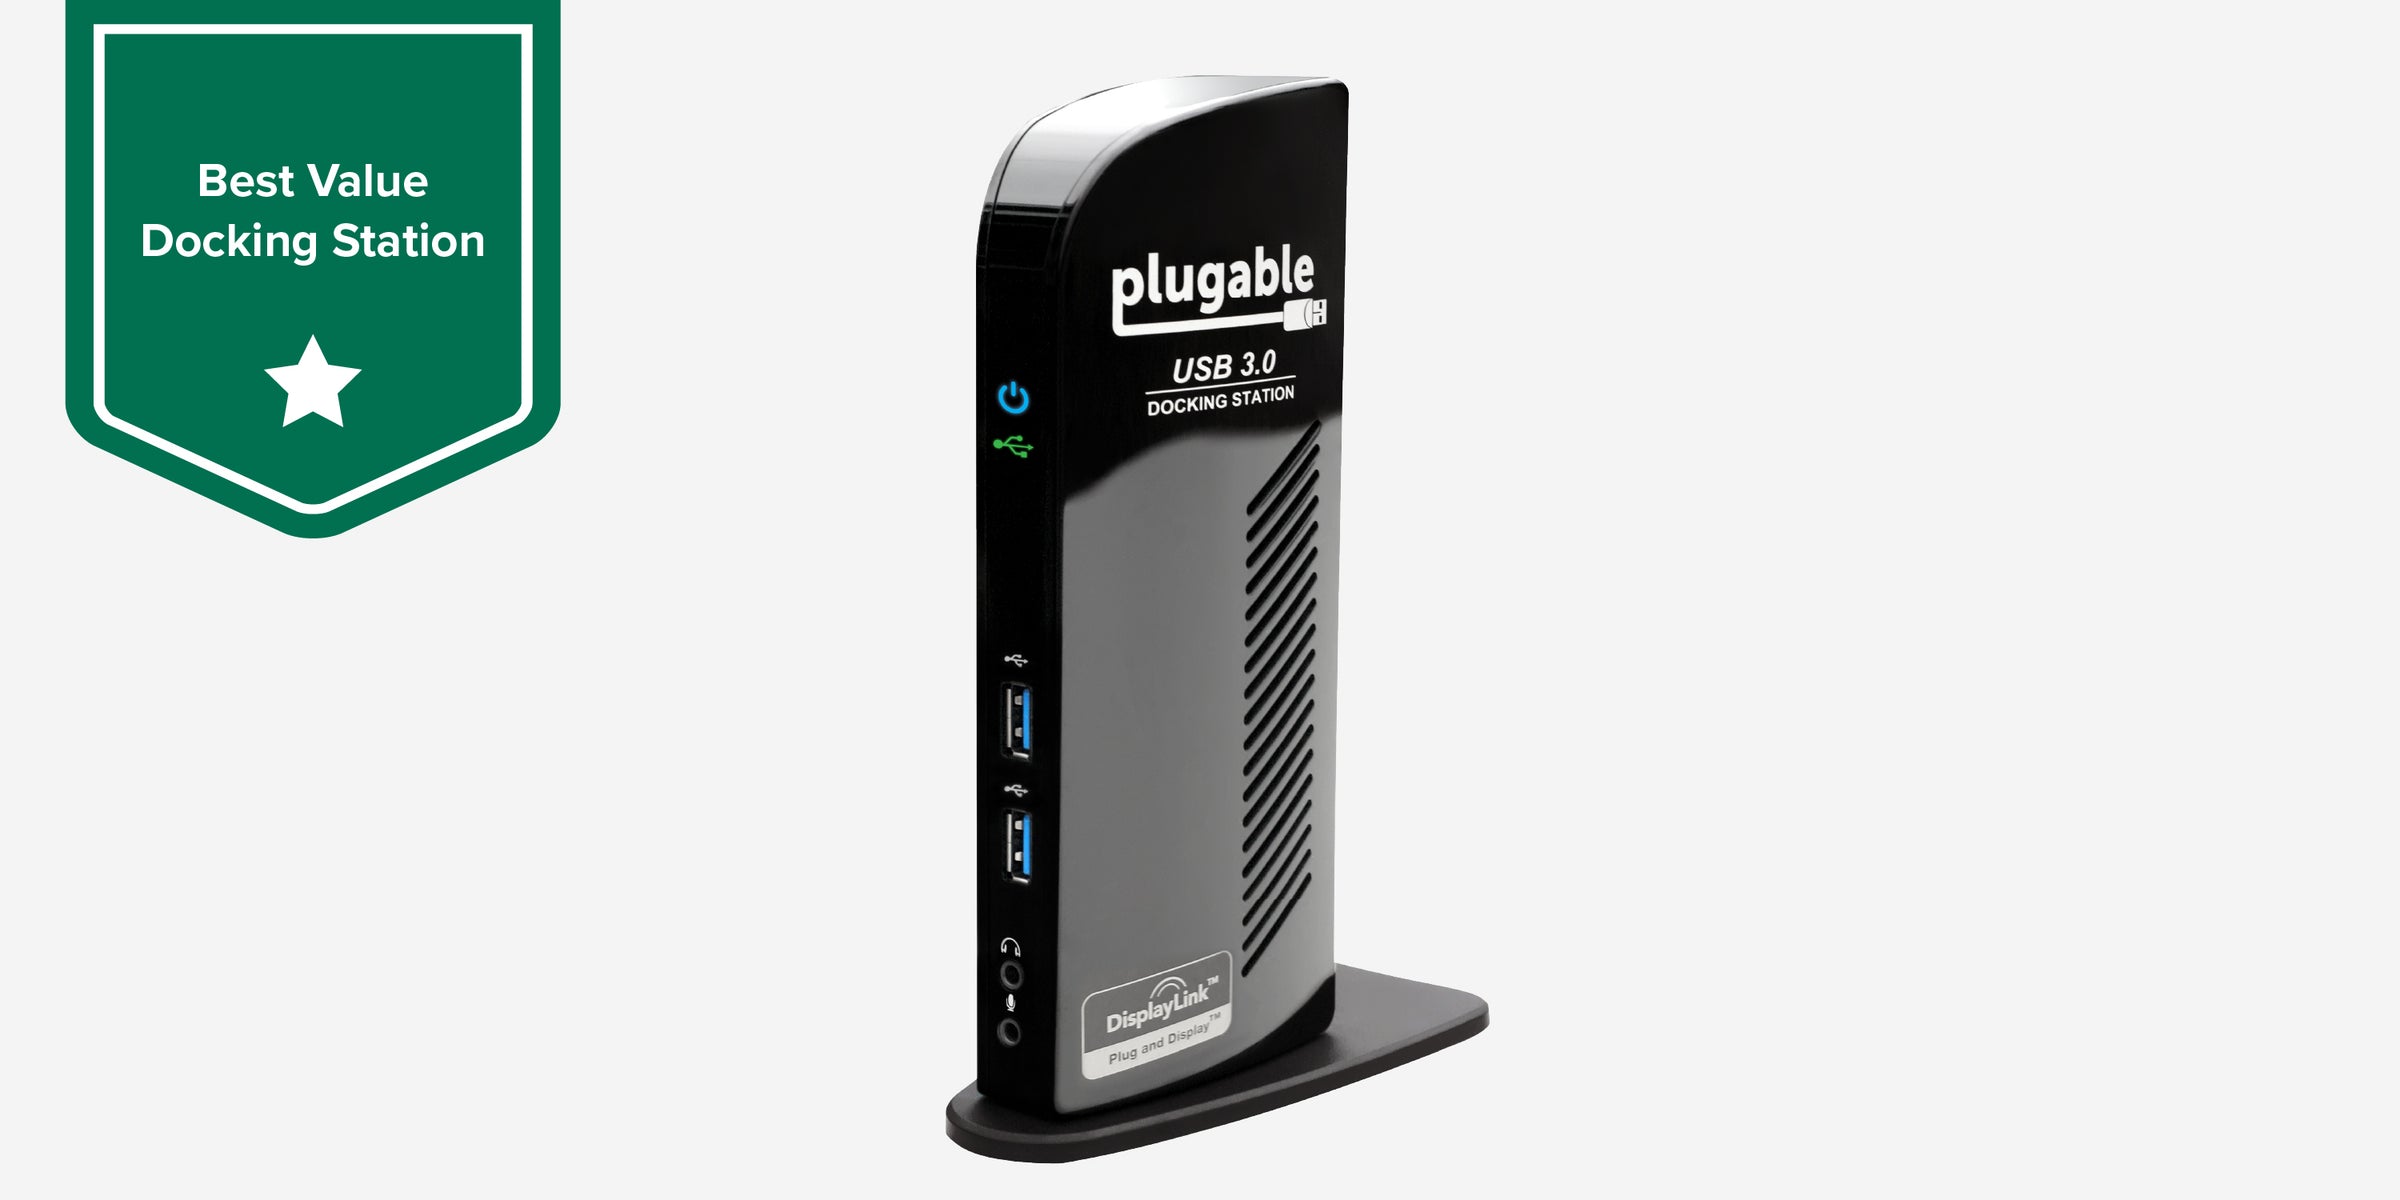 Plugable UD-3900 is the best value docking station for M2 Mac